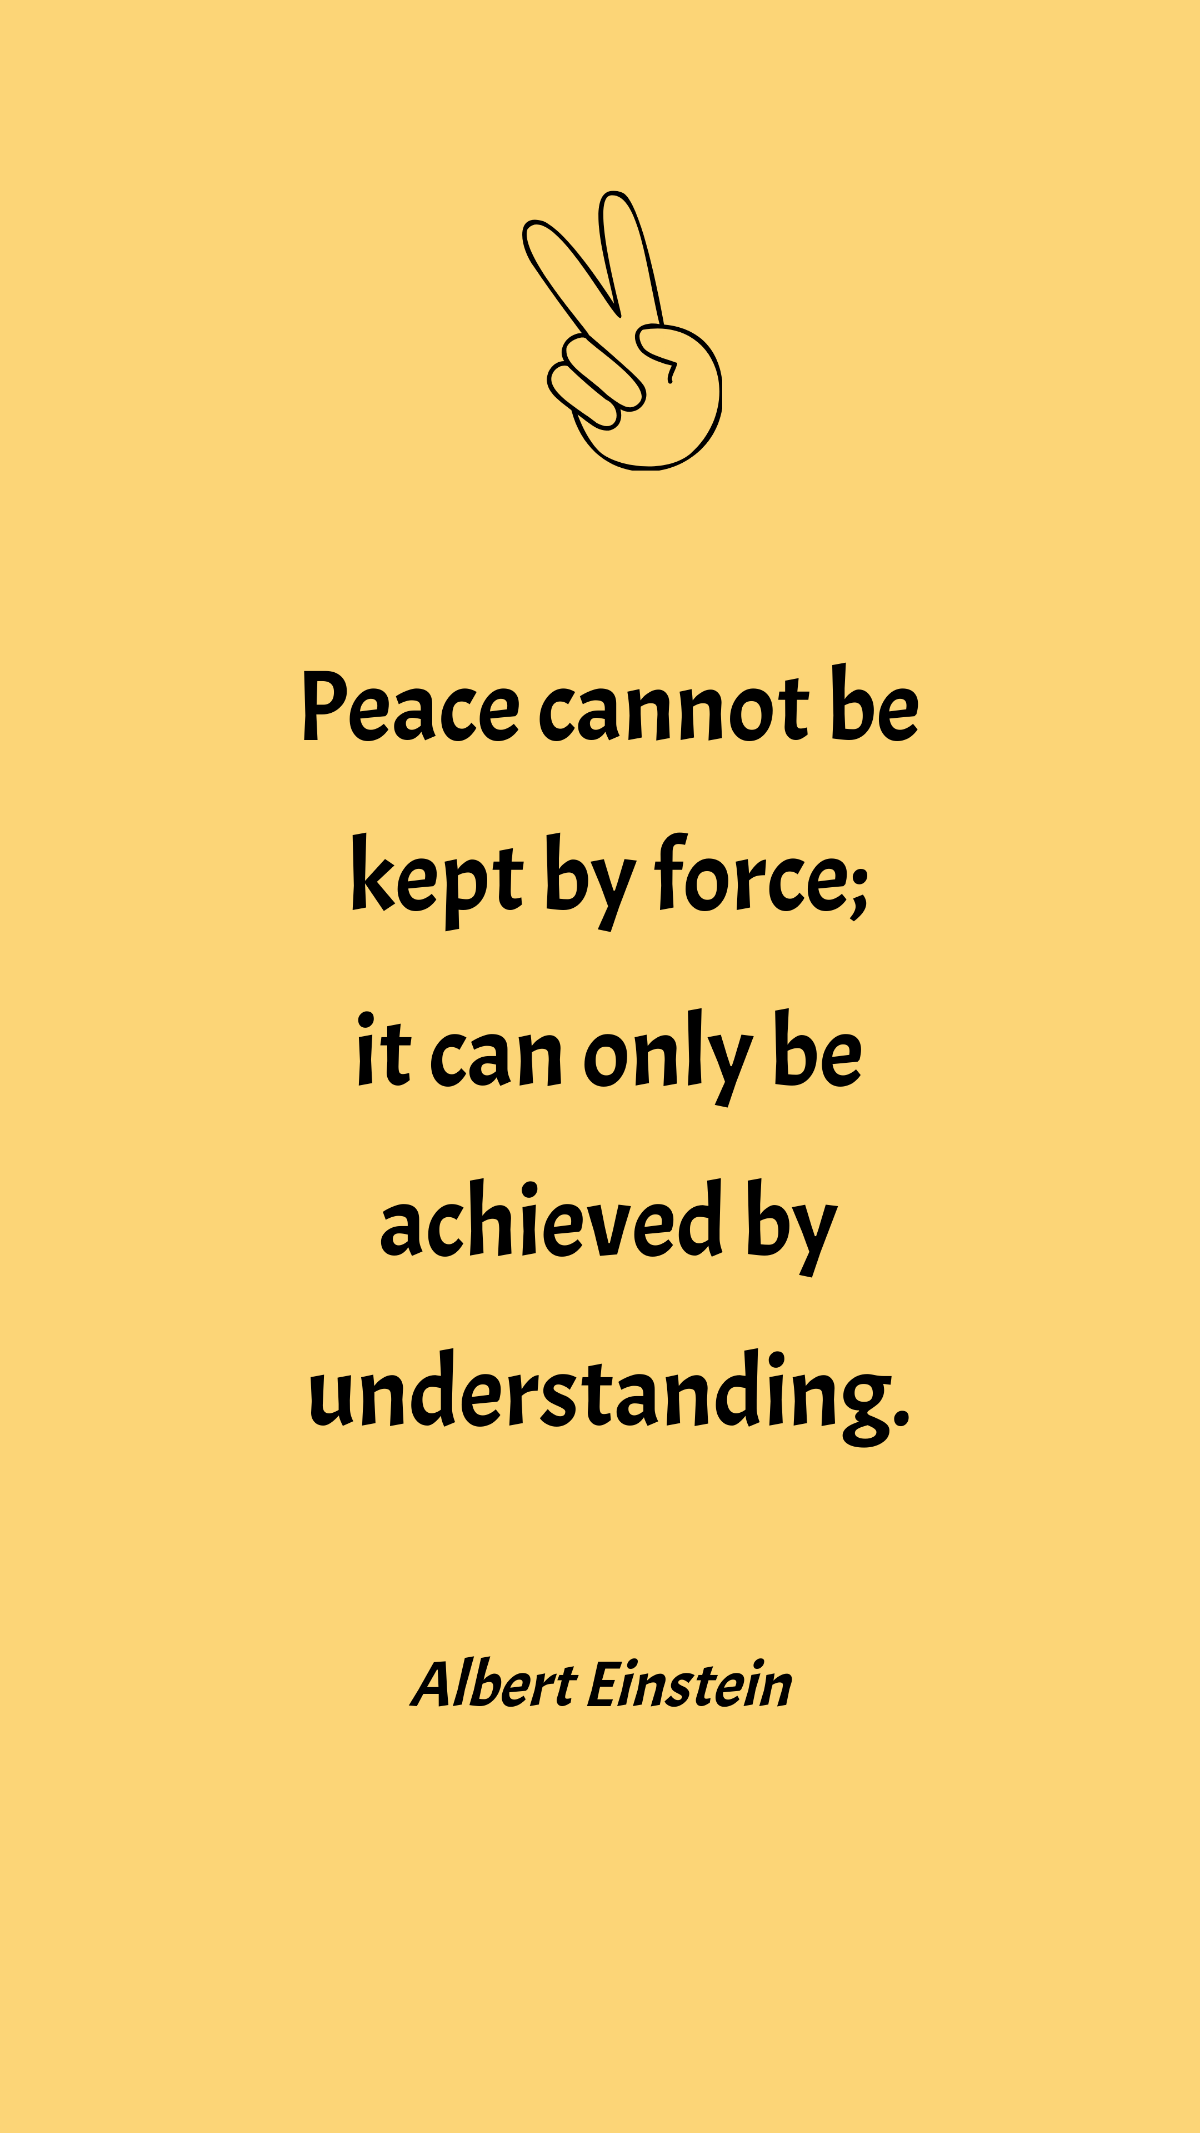 Albert Einstein - Peace cannot be kept by force; it can only be achieved by understanding. Template